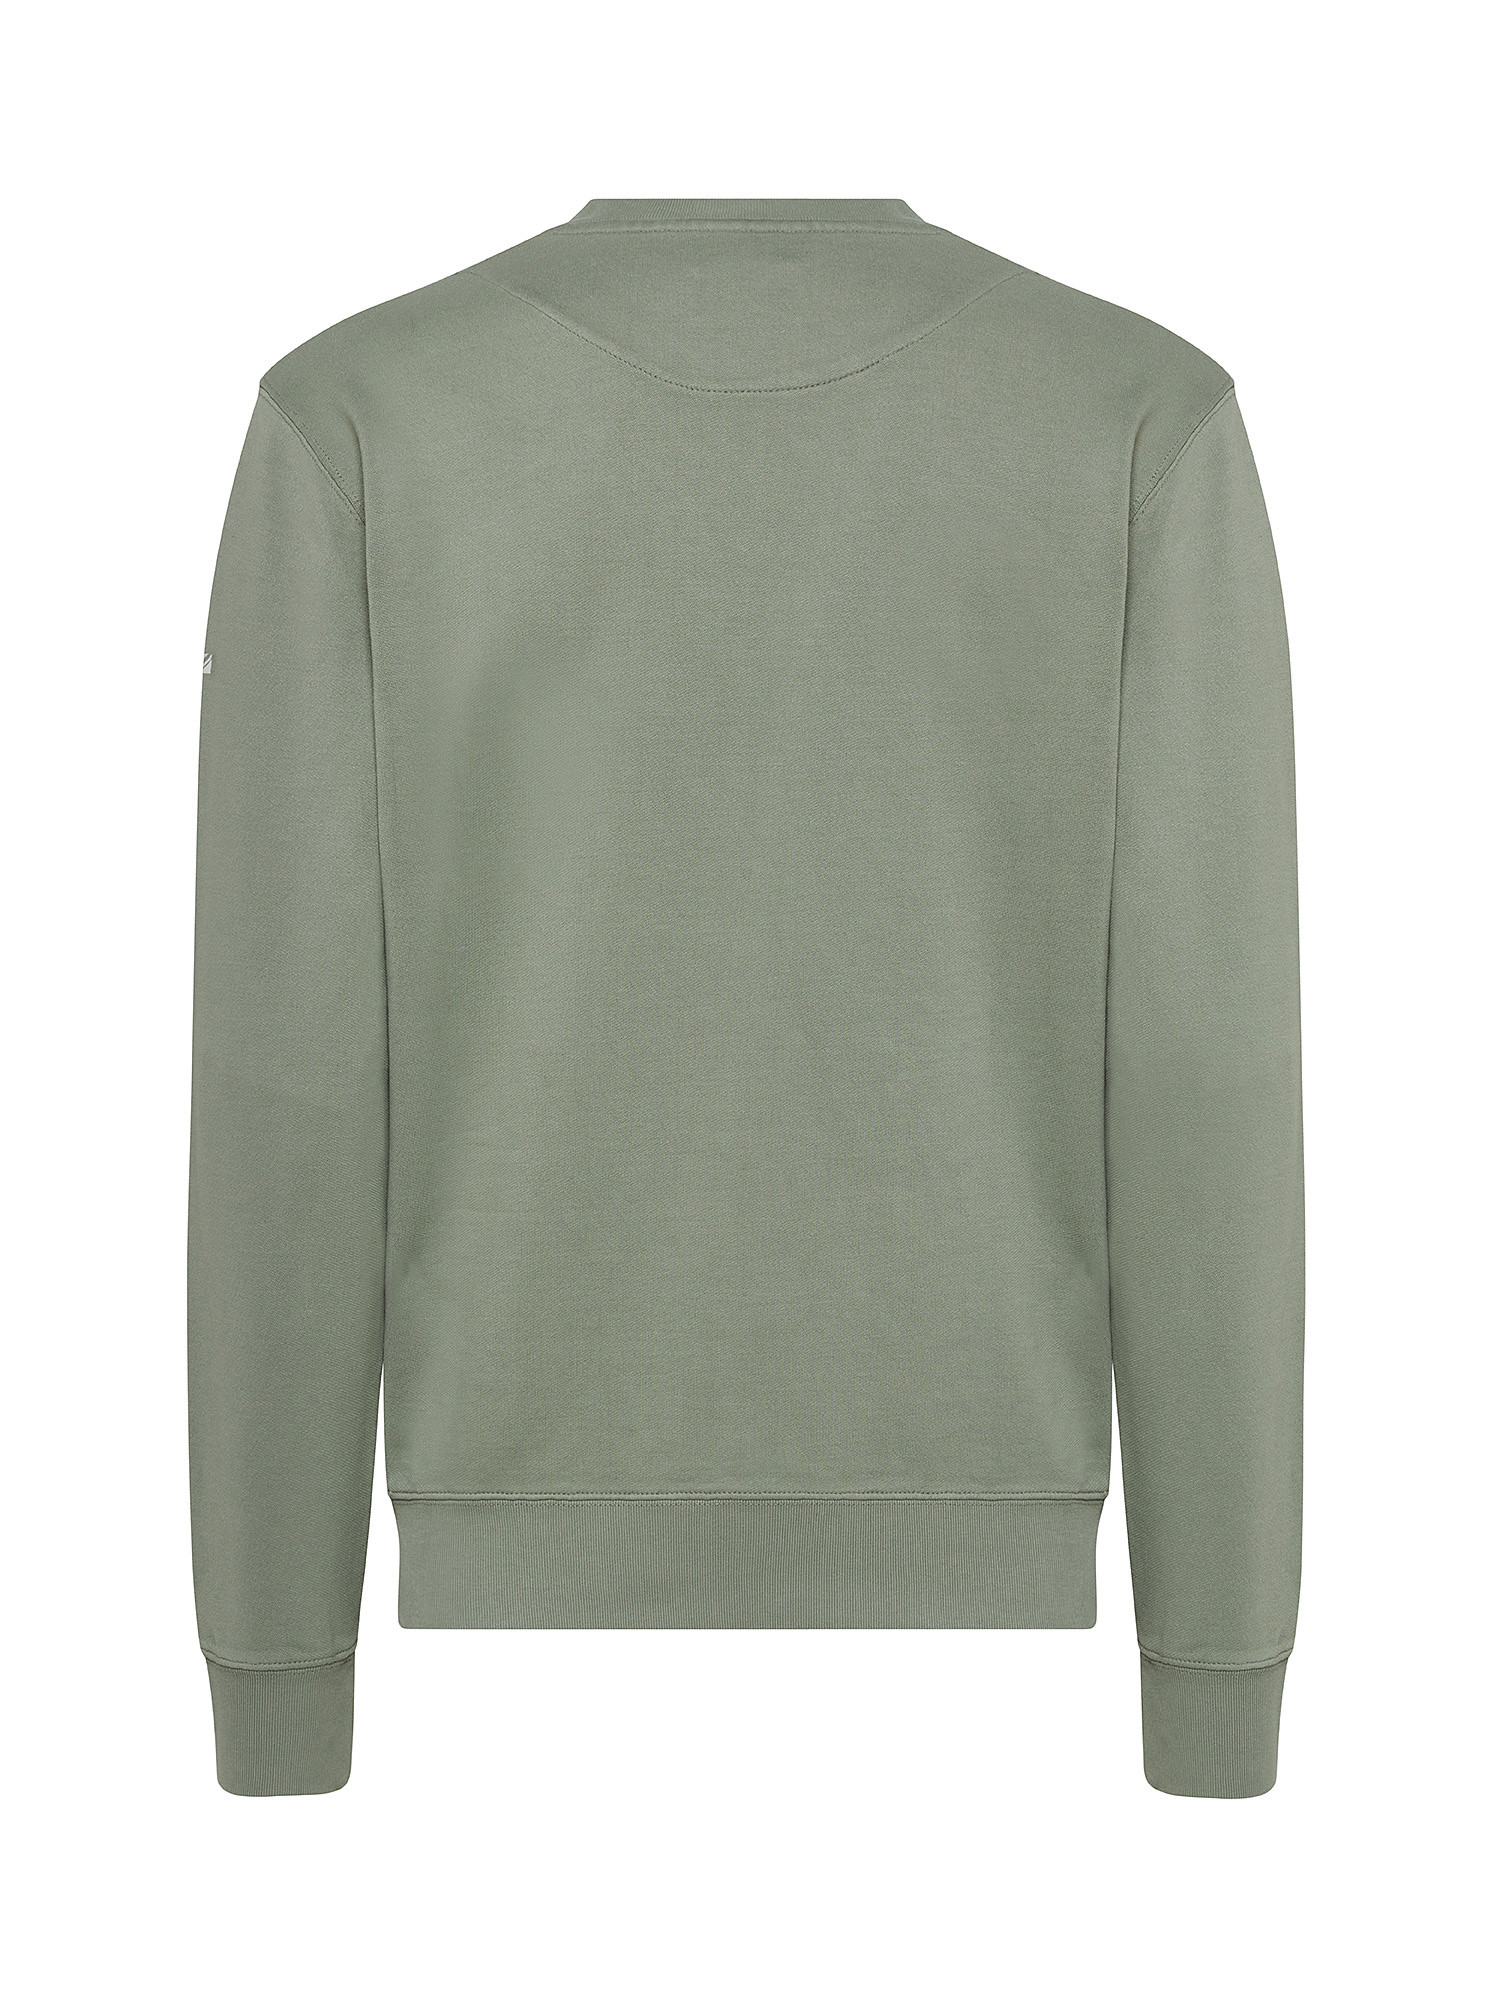 Pepe Jeans - Cotton sweatshirt with logo, Green, large image number 1